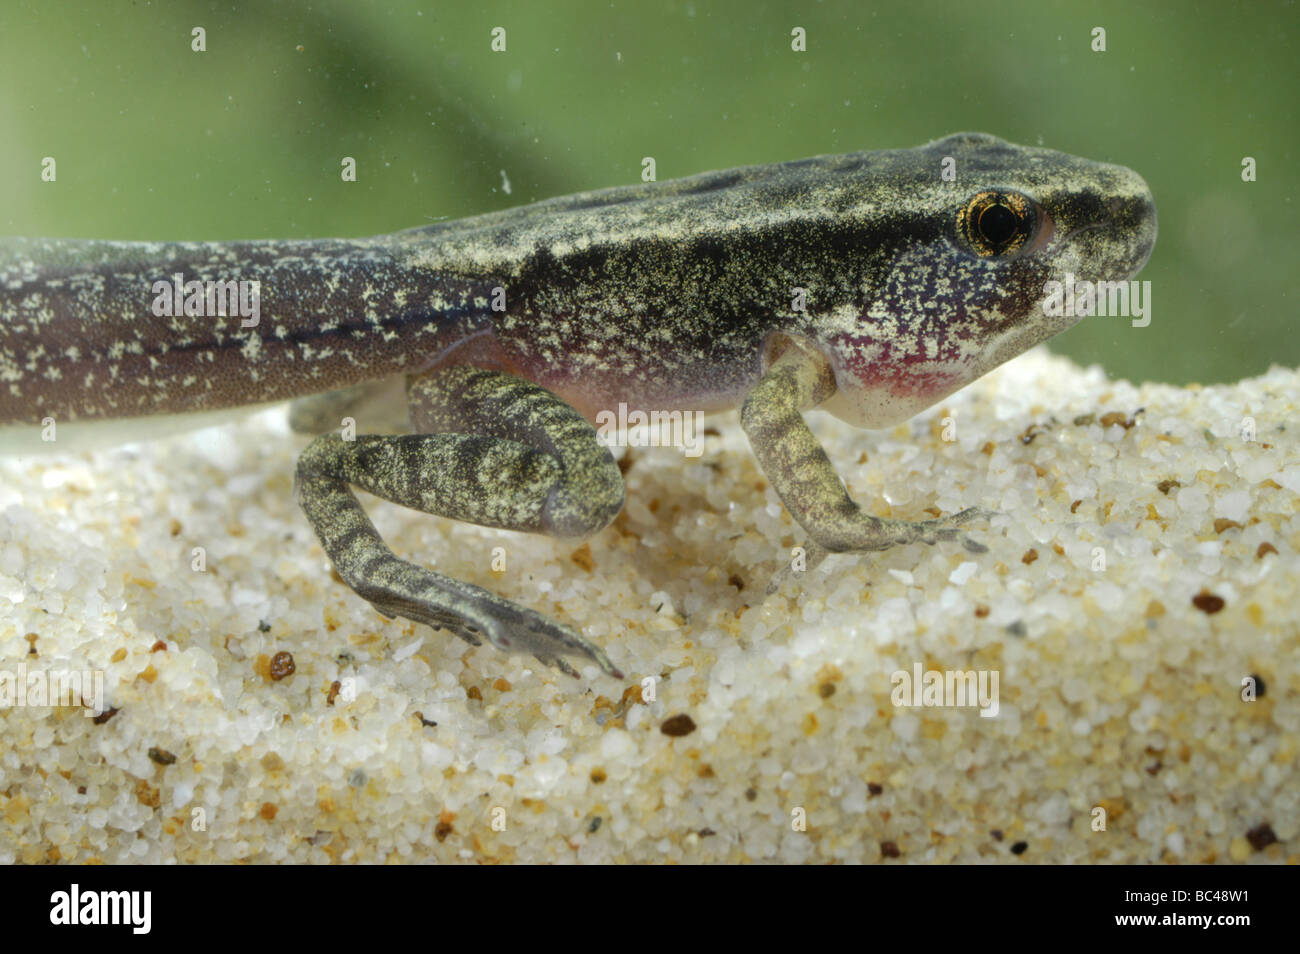 Tadpole of the Torrent Frog, Meristogenys sp, it is still aquatic with a tail and gills but it has begun to develop its legs. Stock Photo